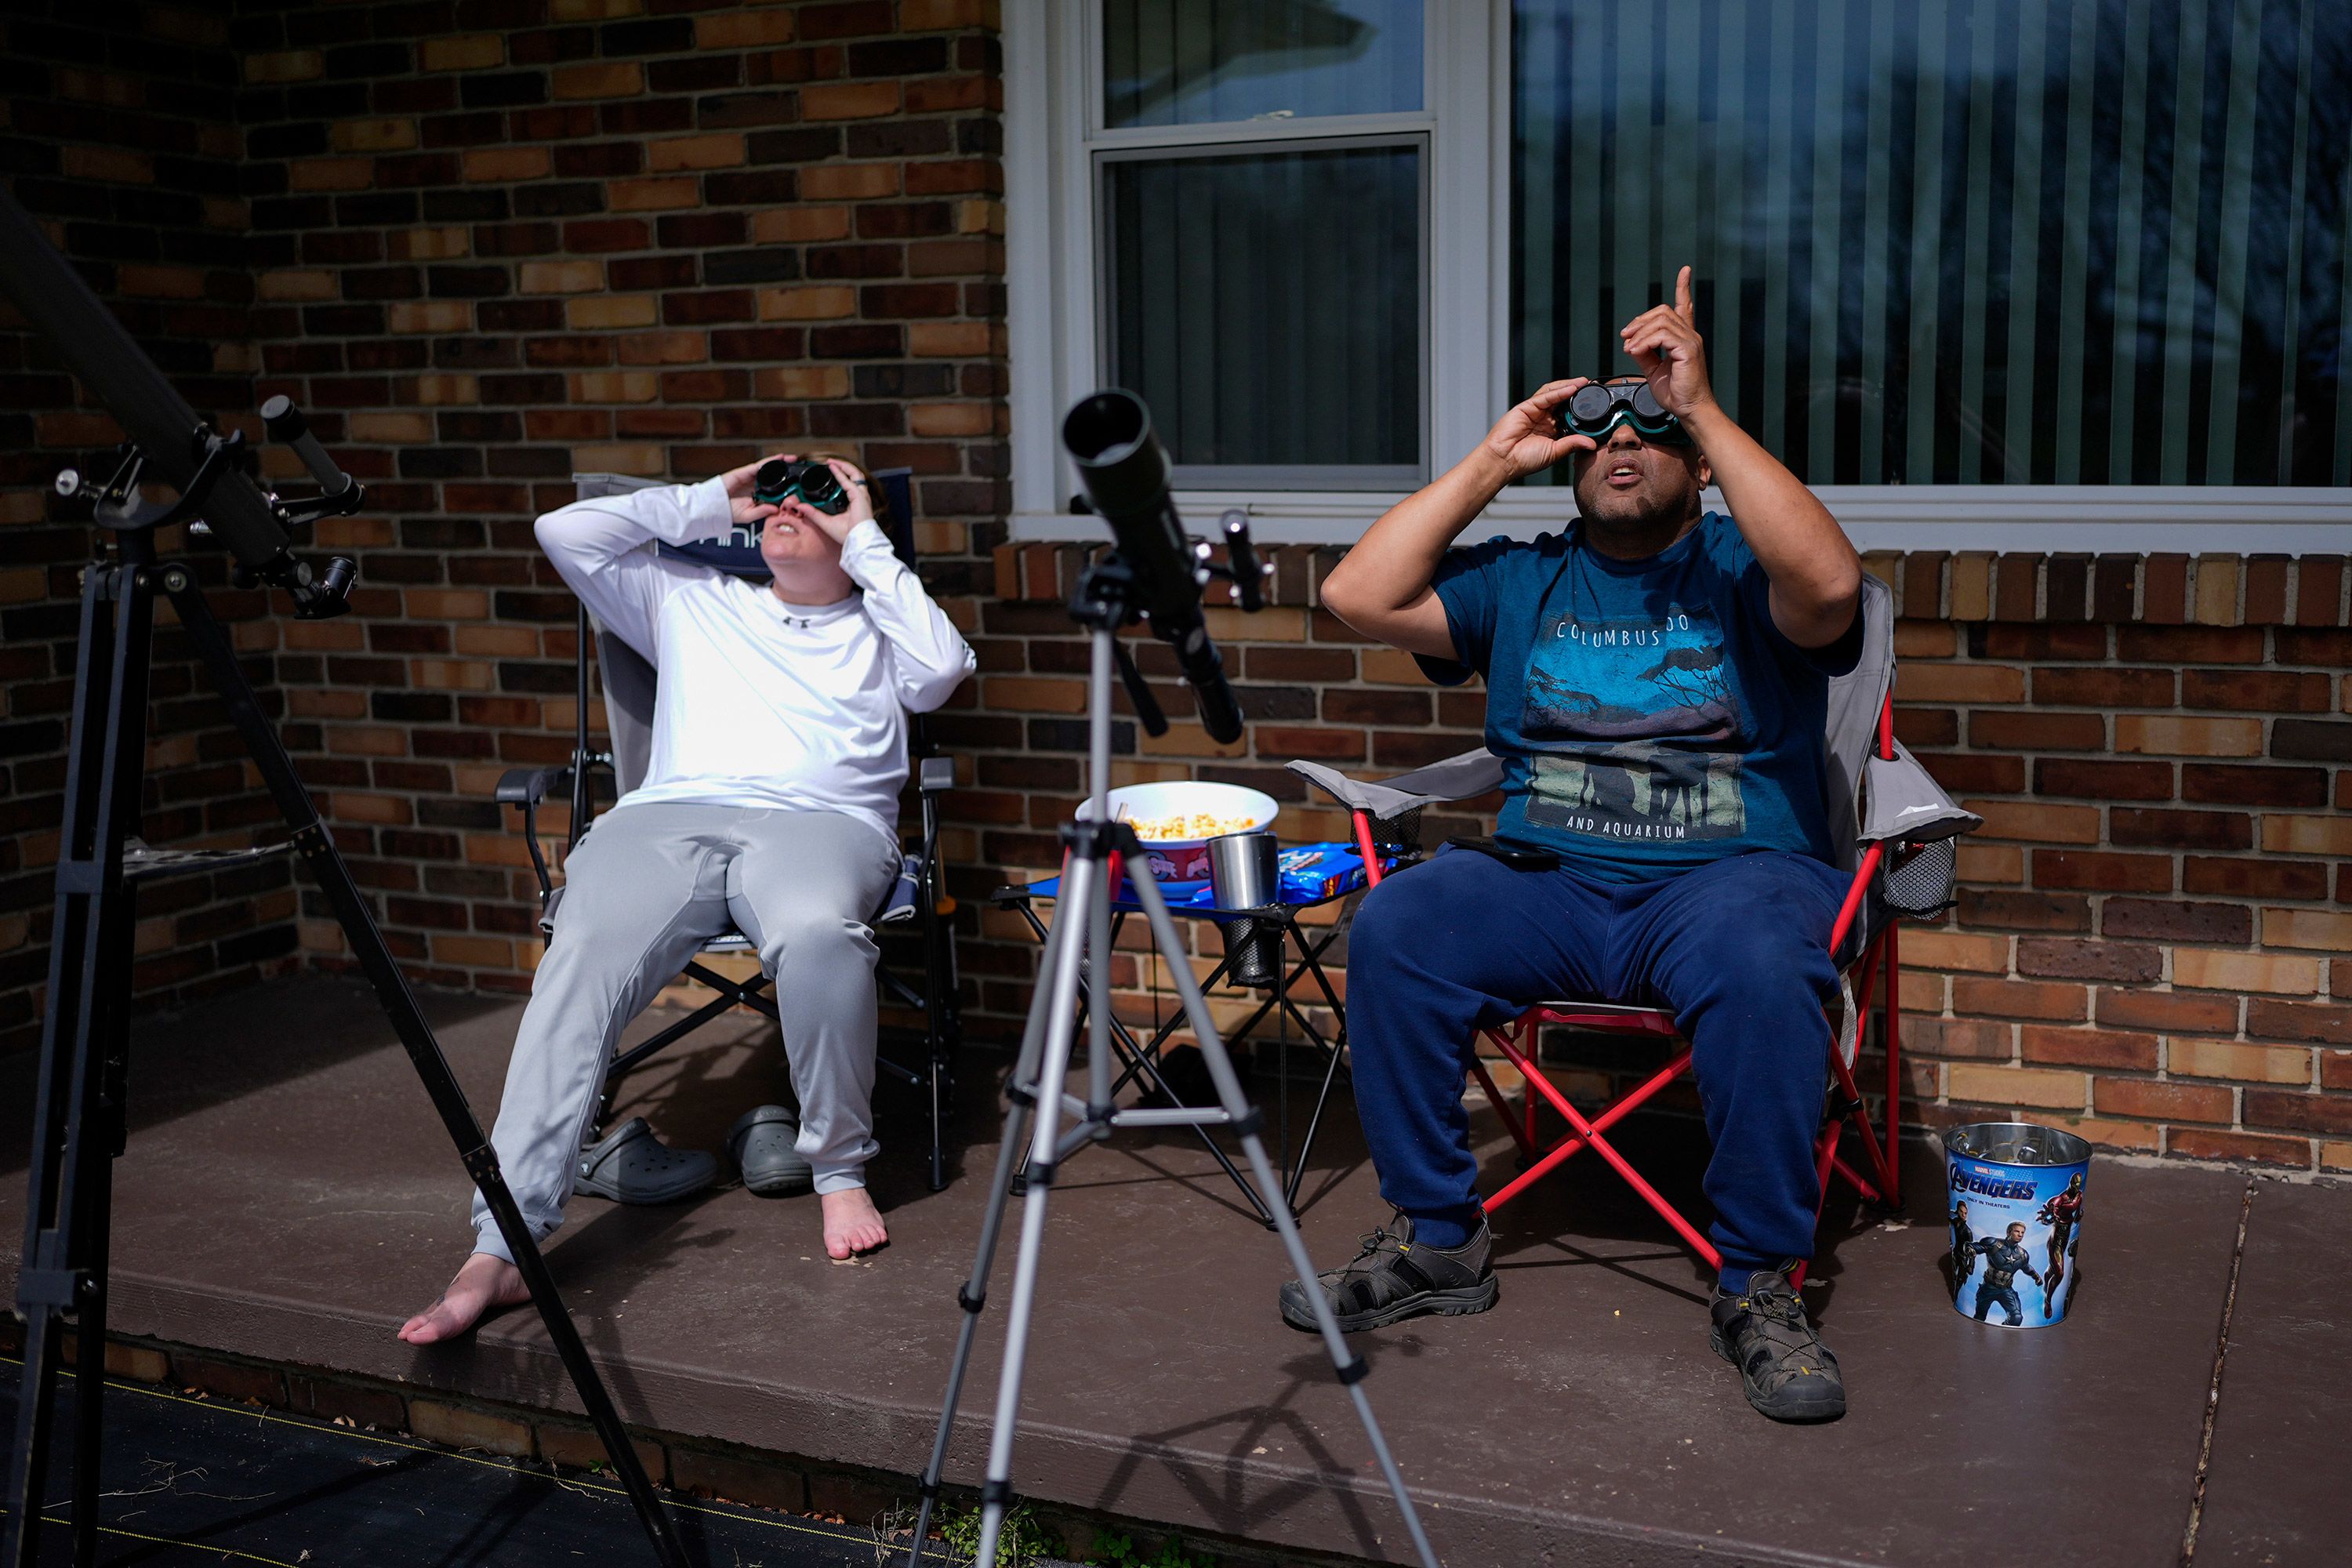 Melissa and Michael Richards use solar goggles to watch the eclipse in Wooster, Ohio.